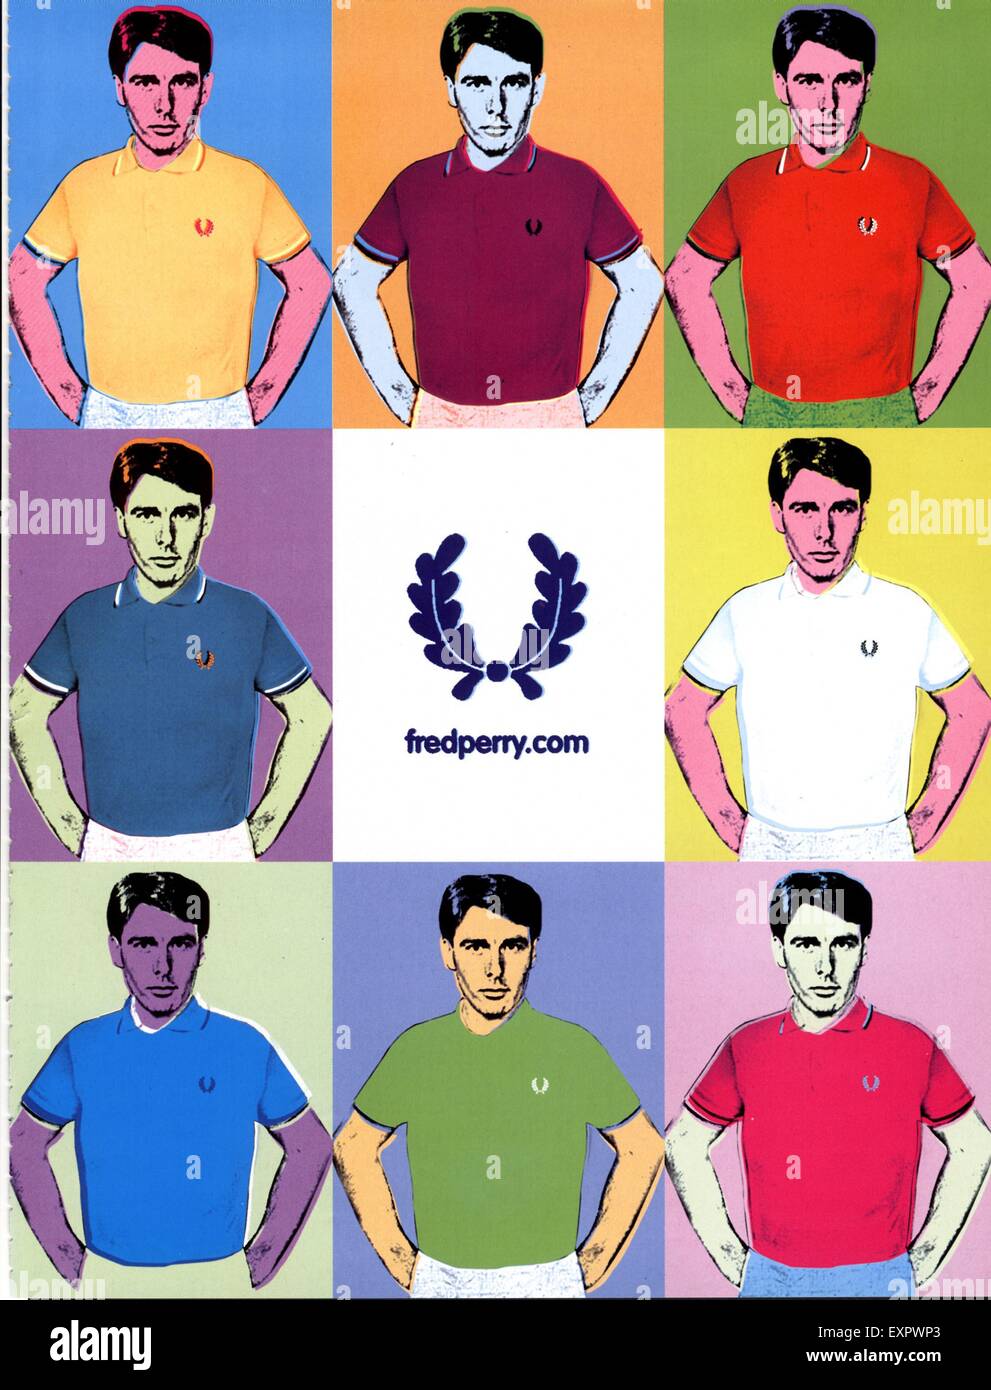 Fred perry advert High Resolution Stock Photography and Images - Alamy